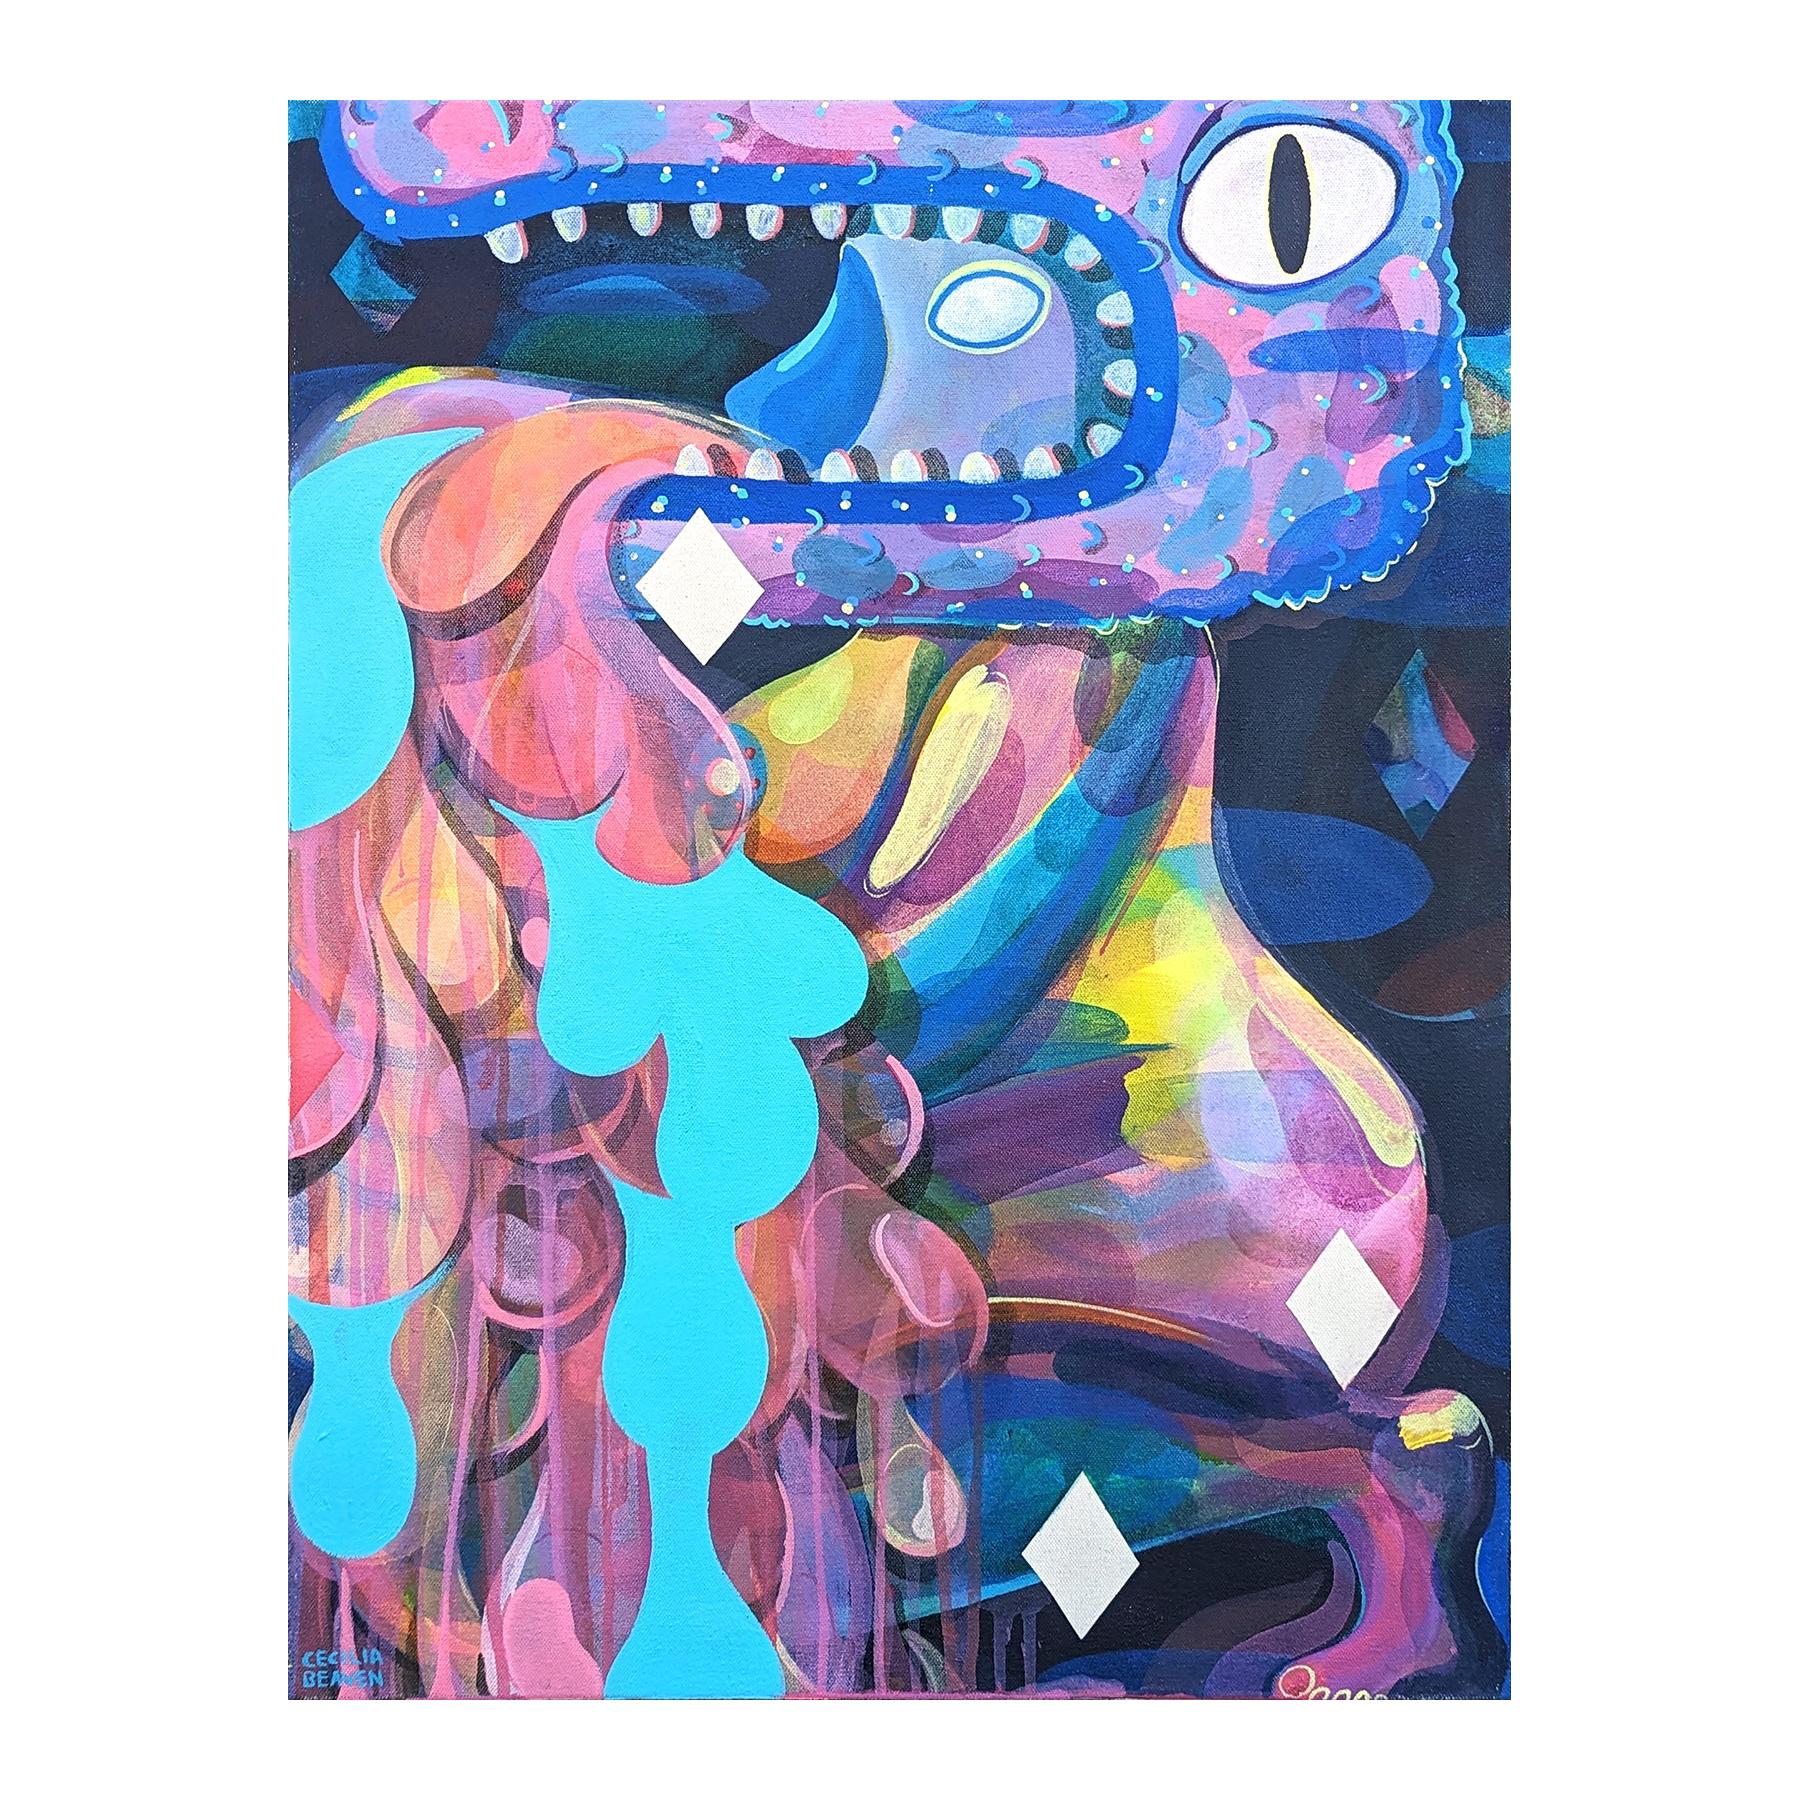 Contemporary purple and blue toned abstract painting by Chicago-based artist Cecilia Beaven. The work features a contorted dragon or alligator inspired figure. Cecilia Beaven draws upon her early life in Mexico City as well as her own personal